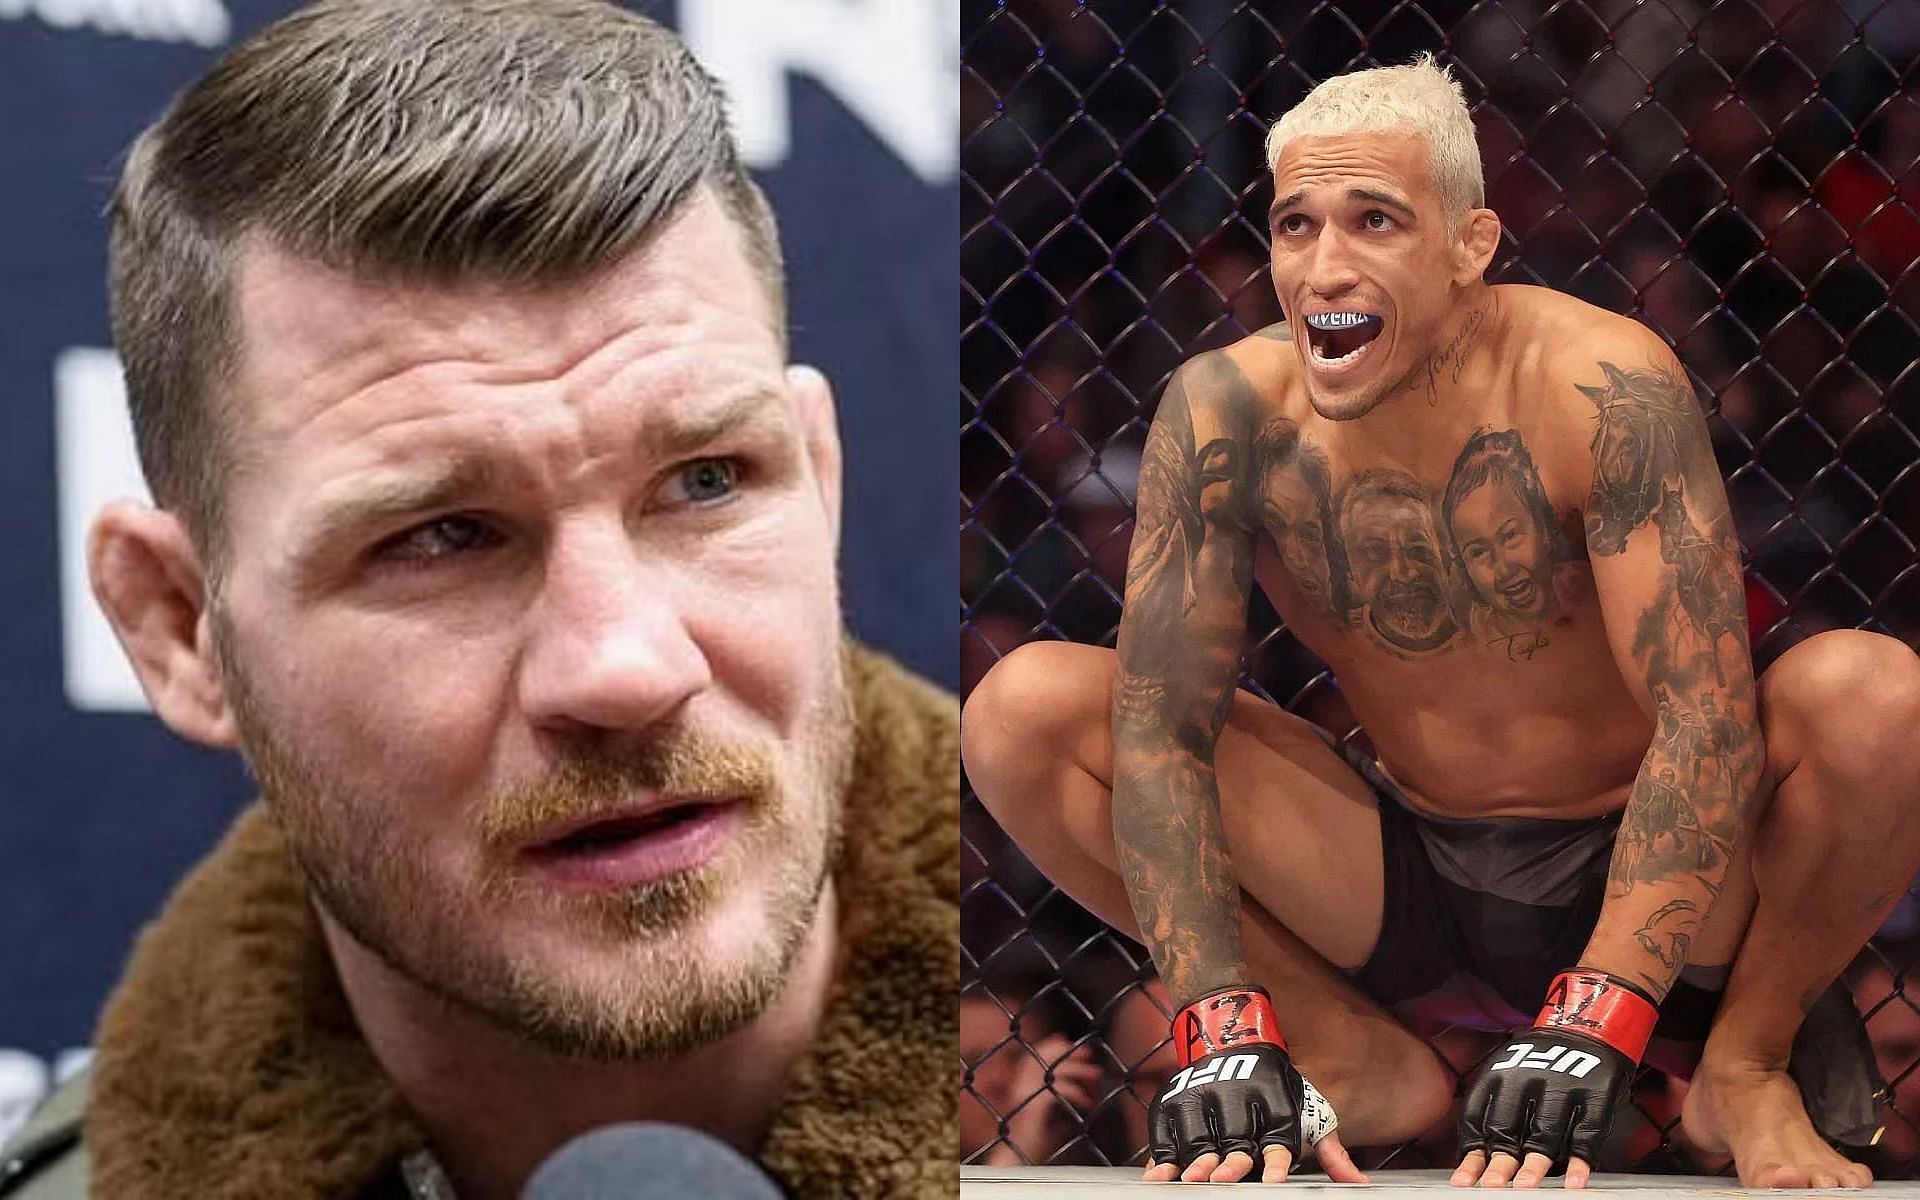 Michael Bisping (left) and Charles Oliveira (right)